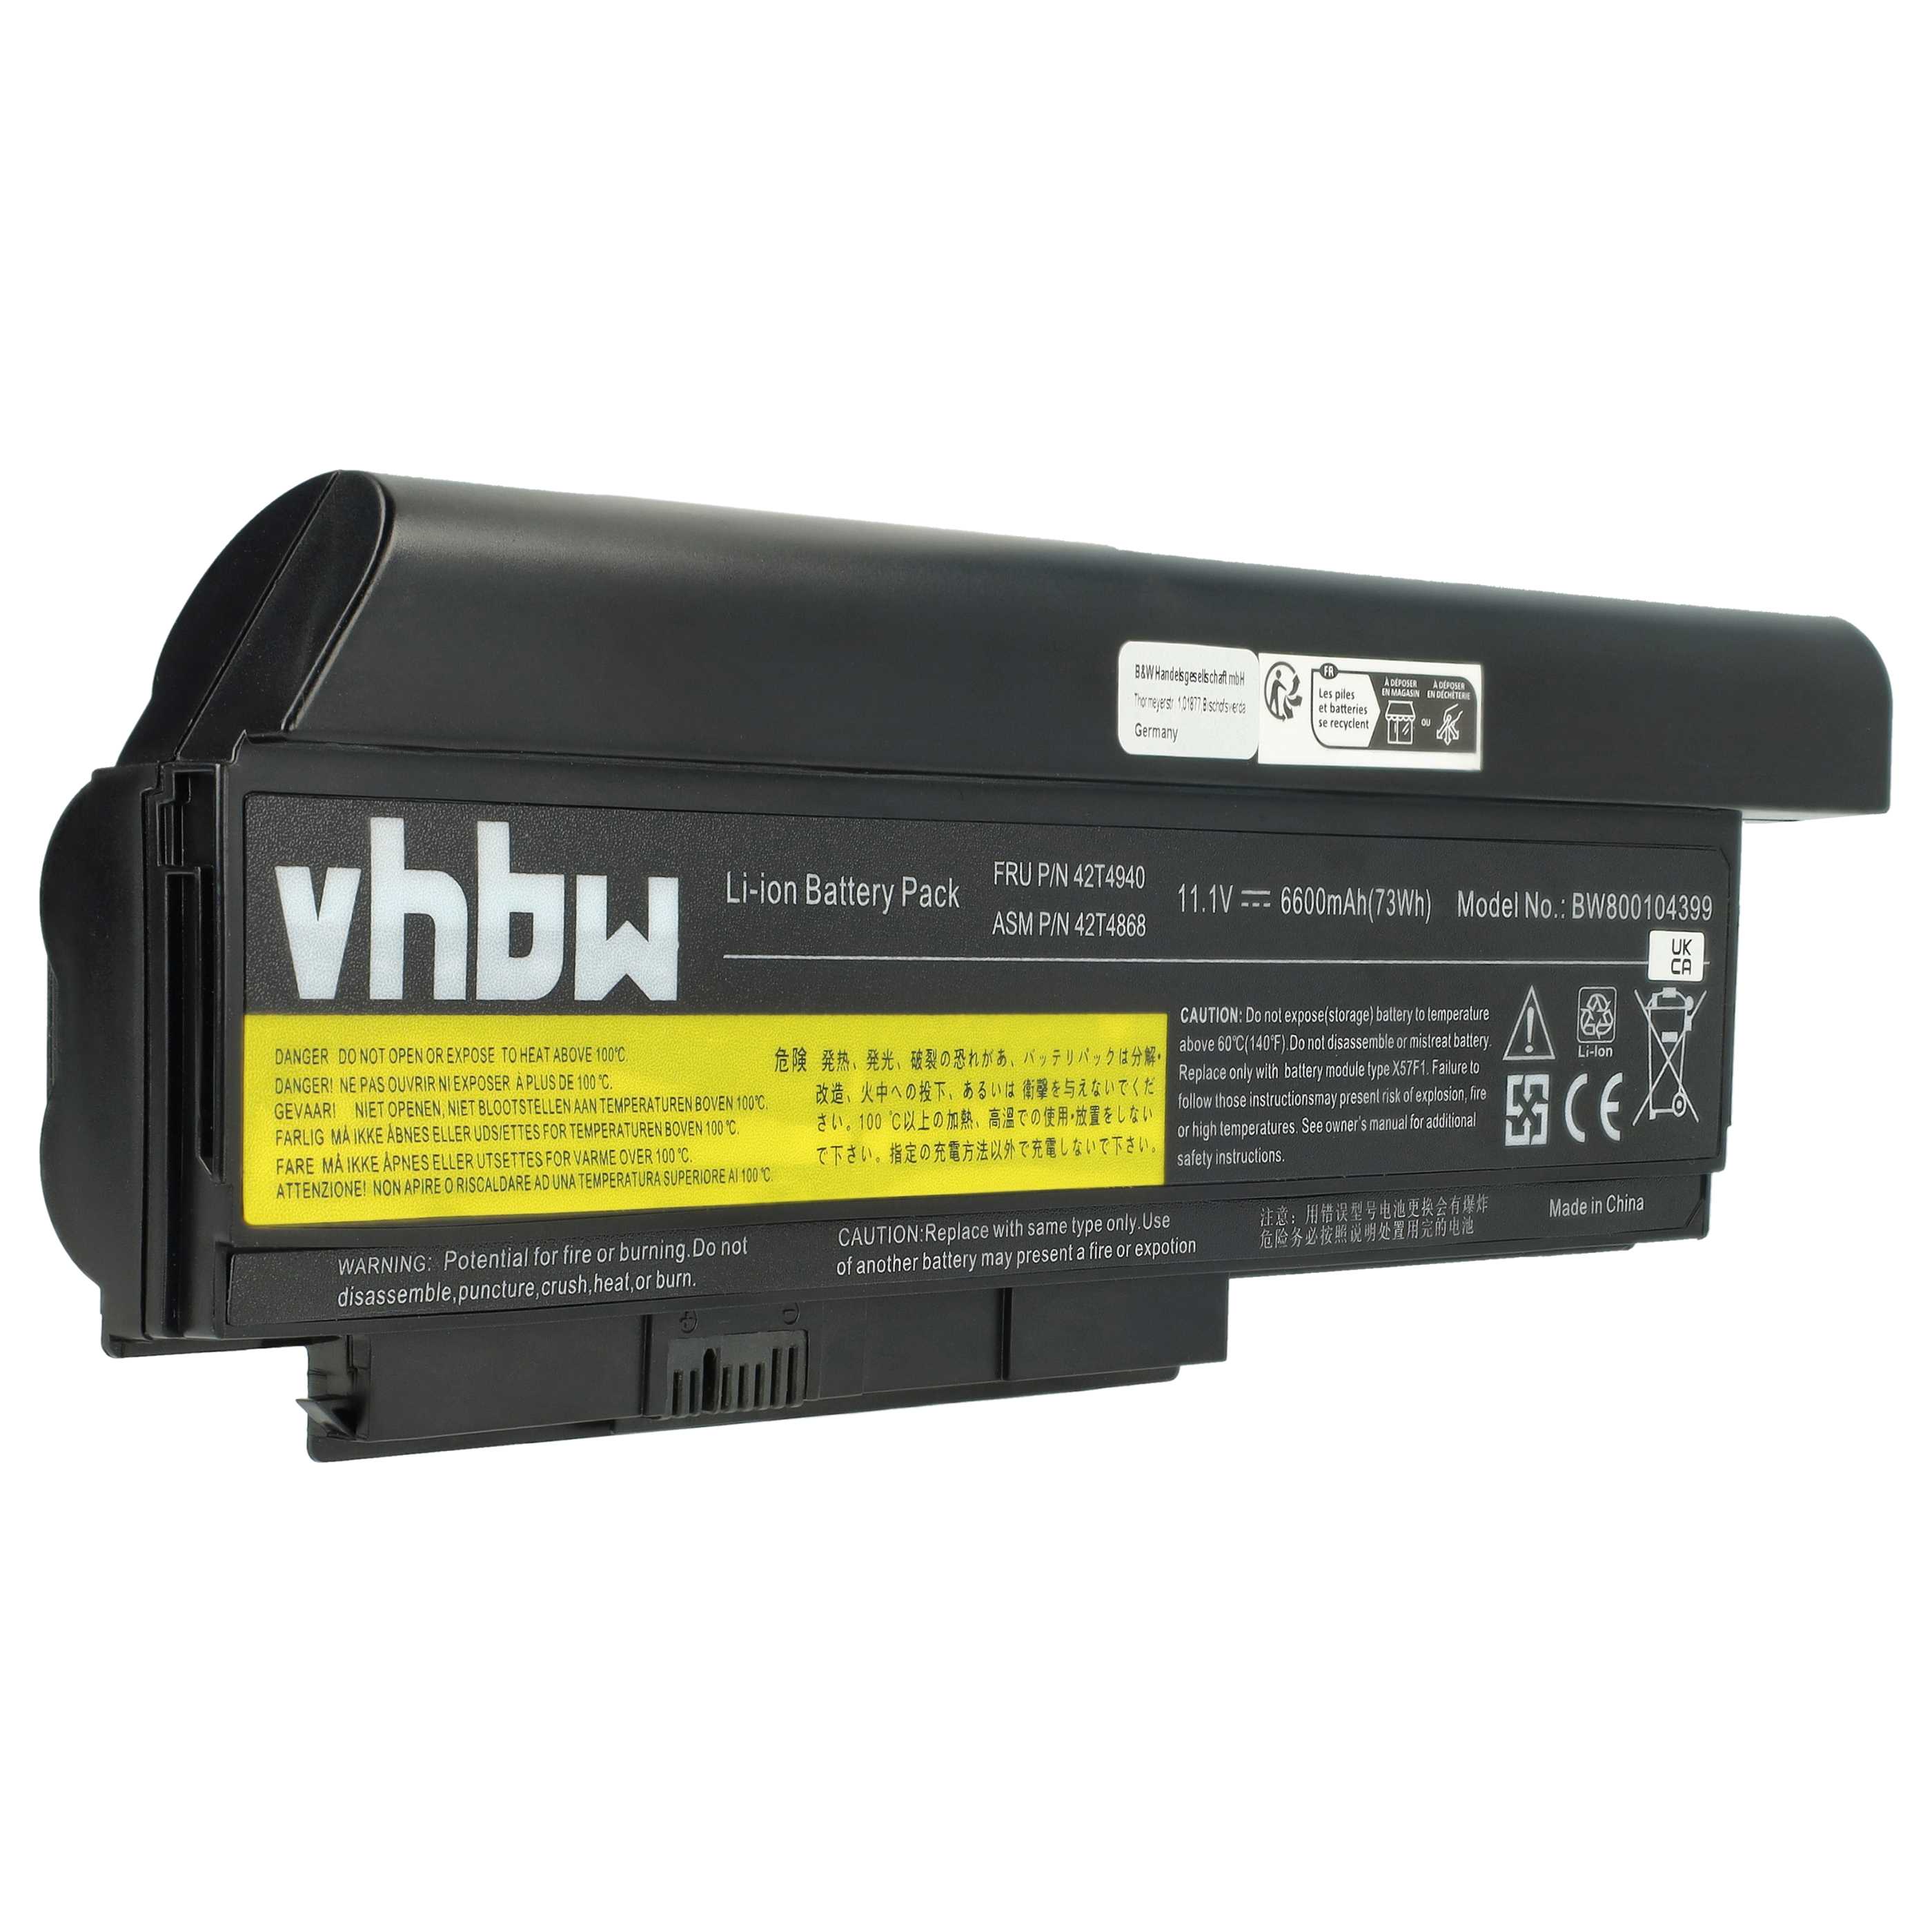 Notebook Battery Replacement for Lenovo 0A36283, 0A36307, 0A36281, 0A36282 - 6600mAh 10.8V Li-Ion, black